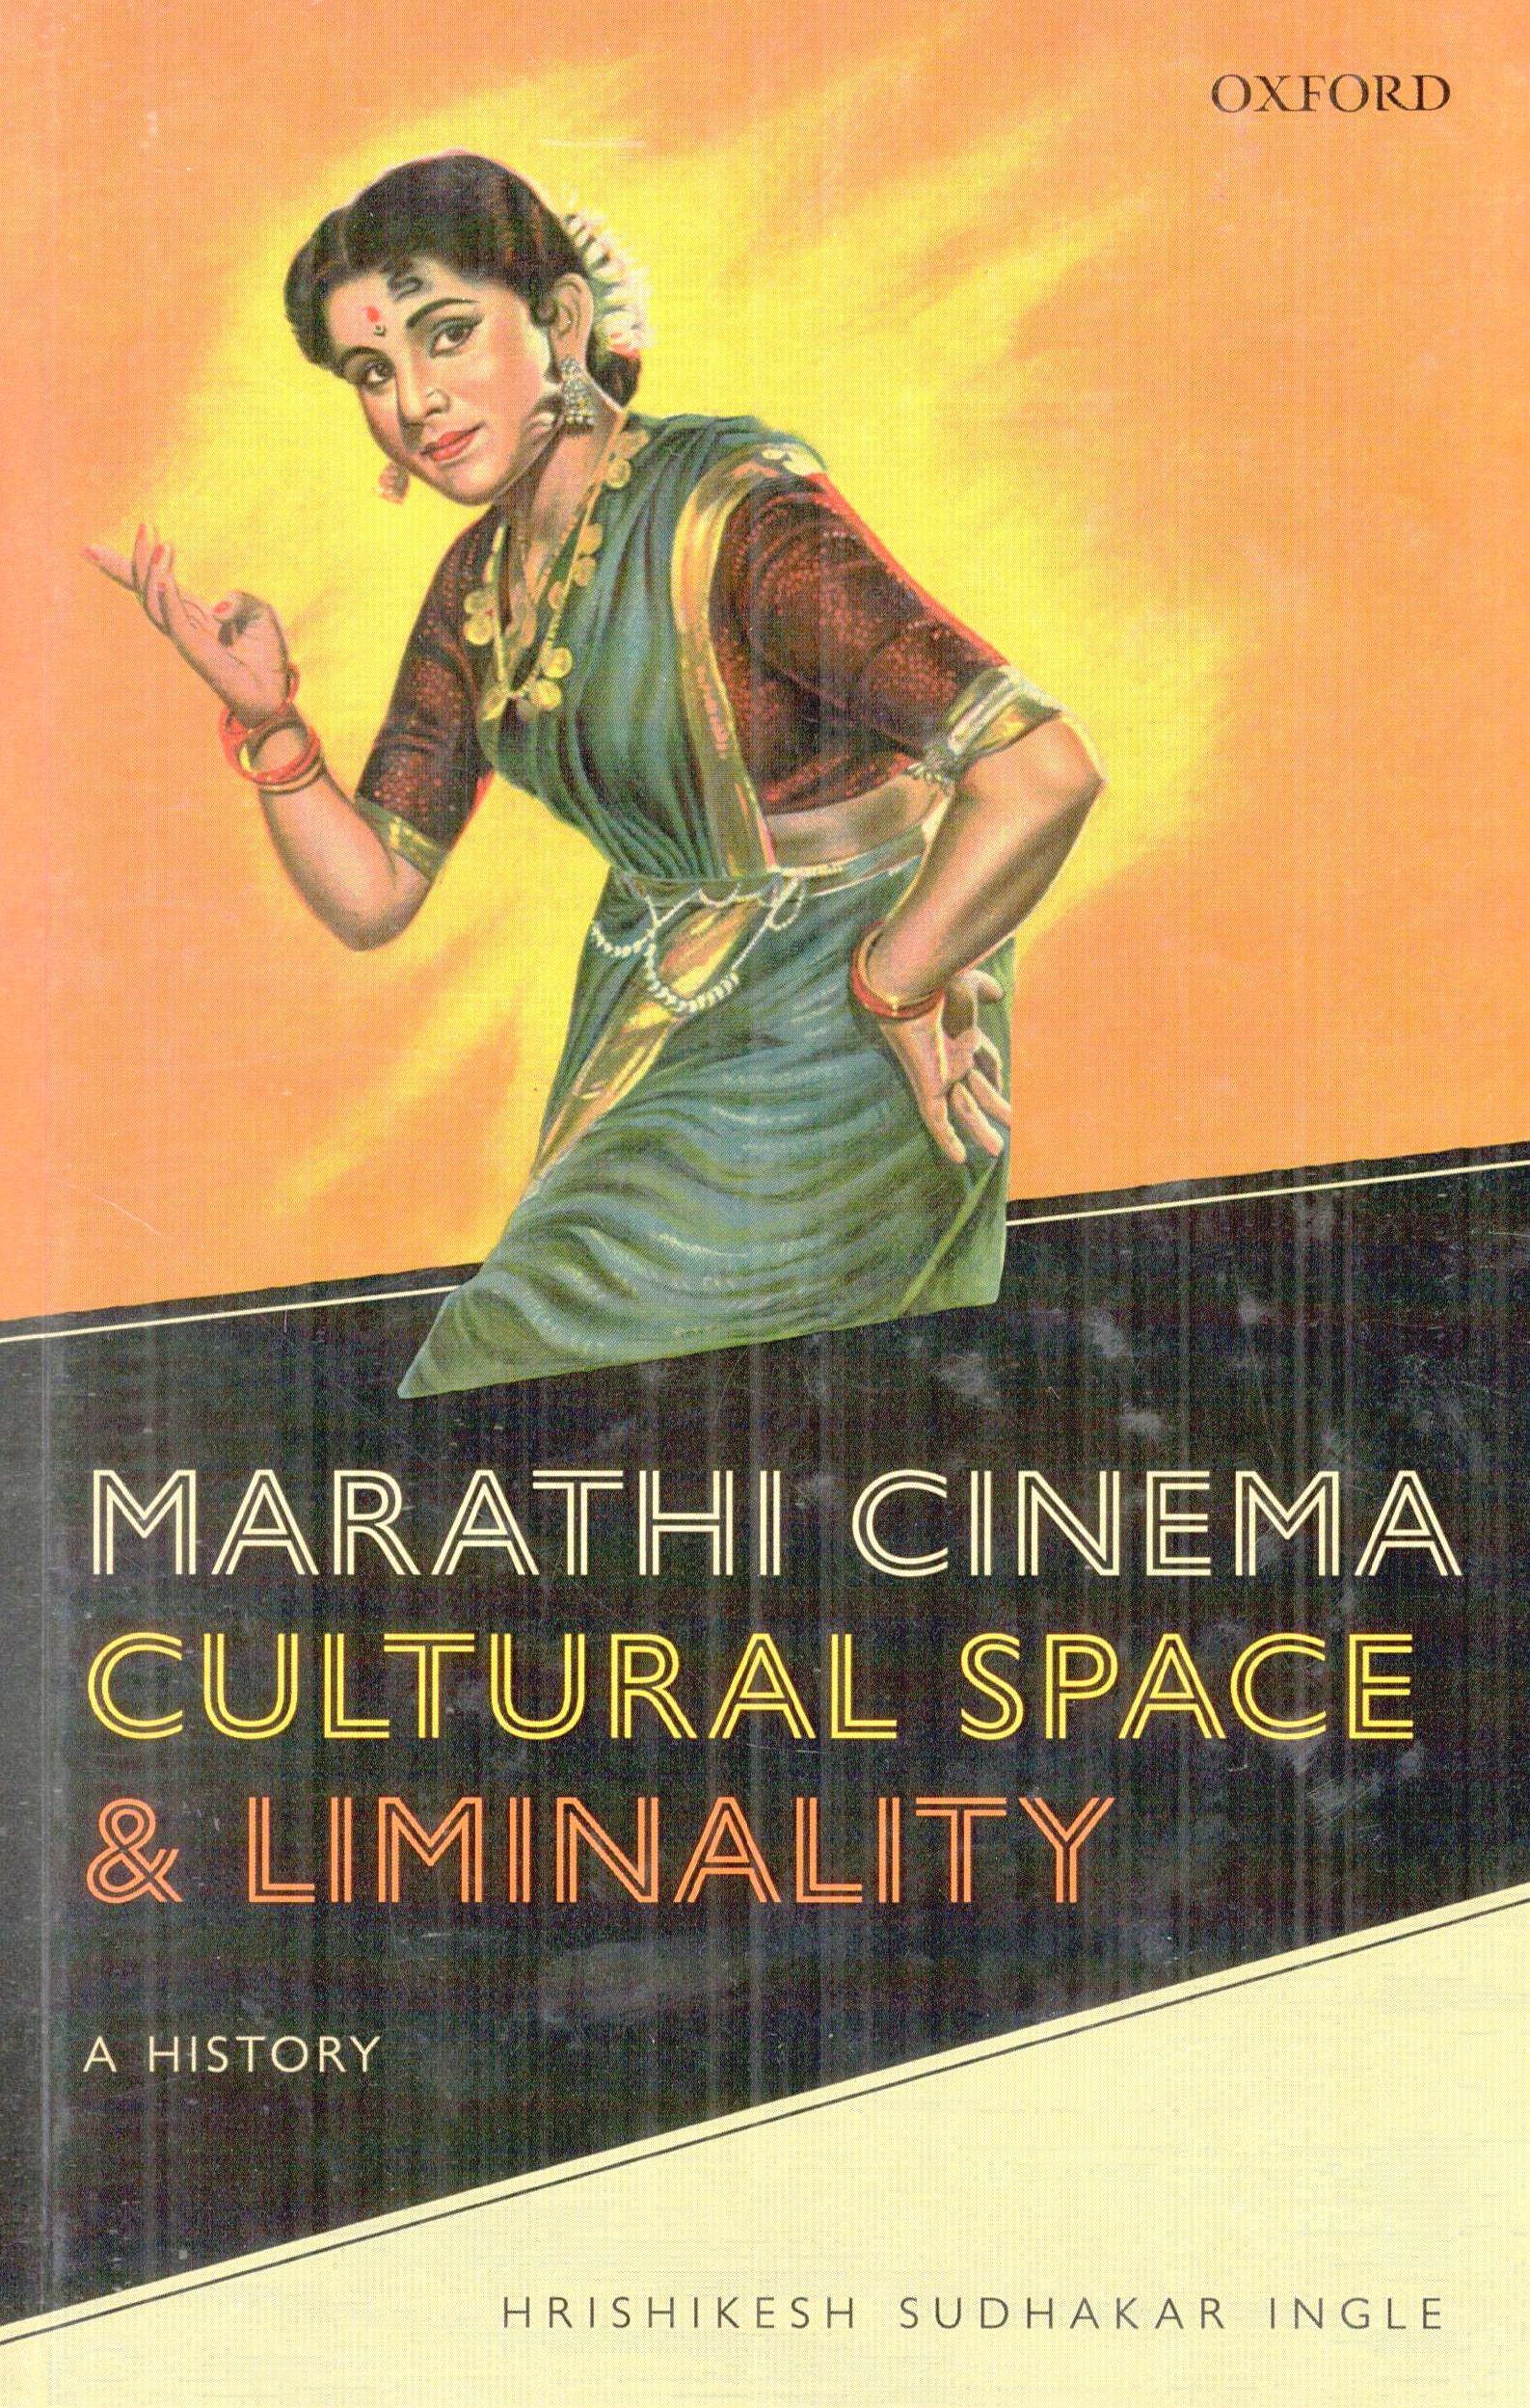 Marathi cinema, cultural space, and liminality